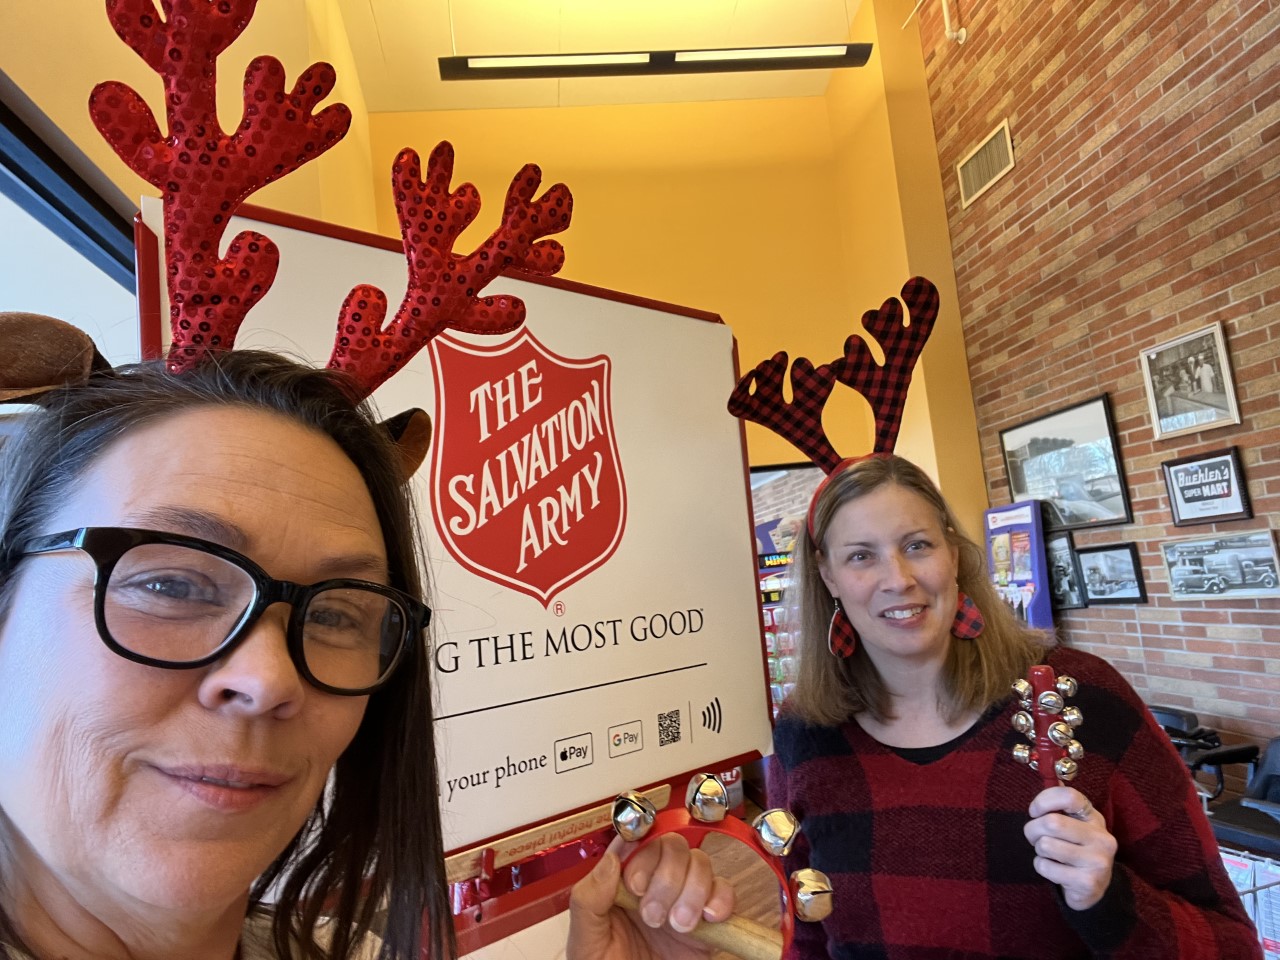 Dawn & Michele ringing the bell for the Orrville Salvation Army - Maiwurm Service Center at Buehler's